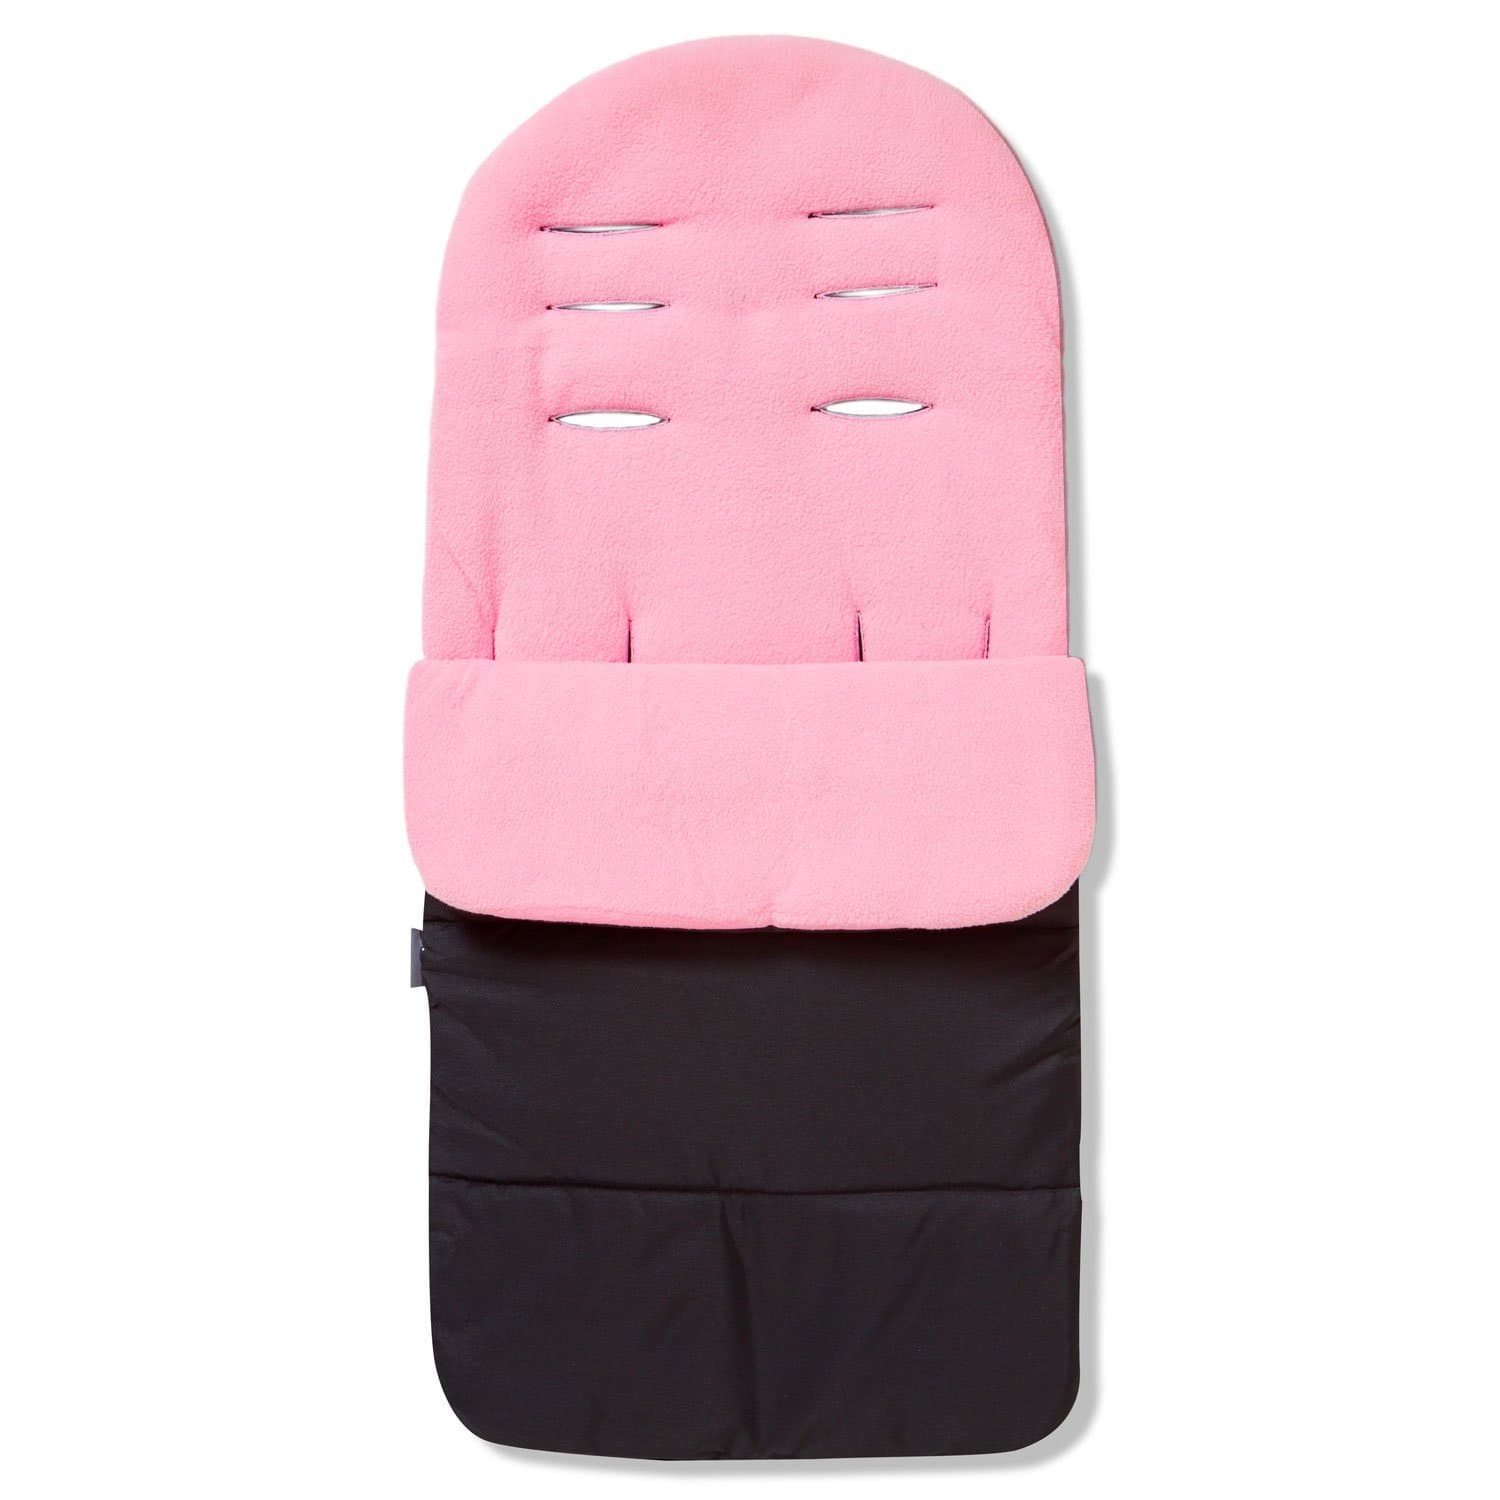 Premium Footmuff / Cosy Toes Compatible with Mothercare - Candy Pink / Fits All Models | For Your Little One